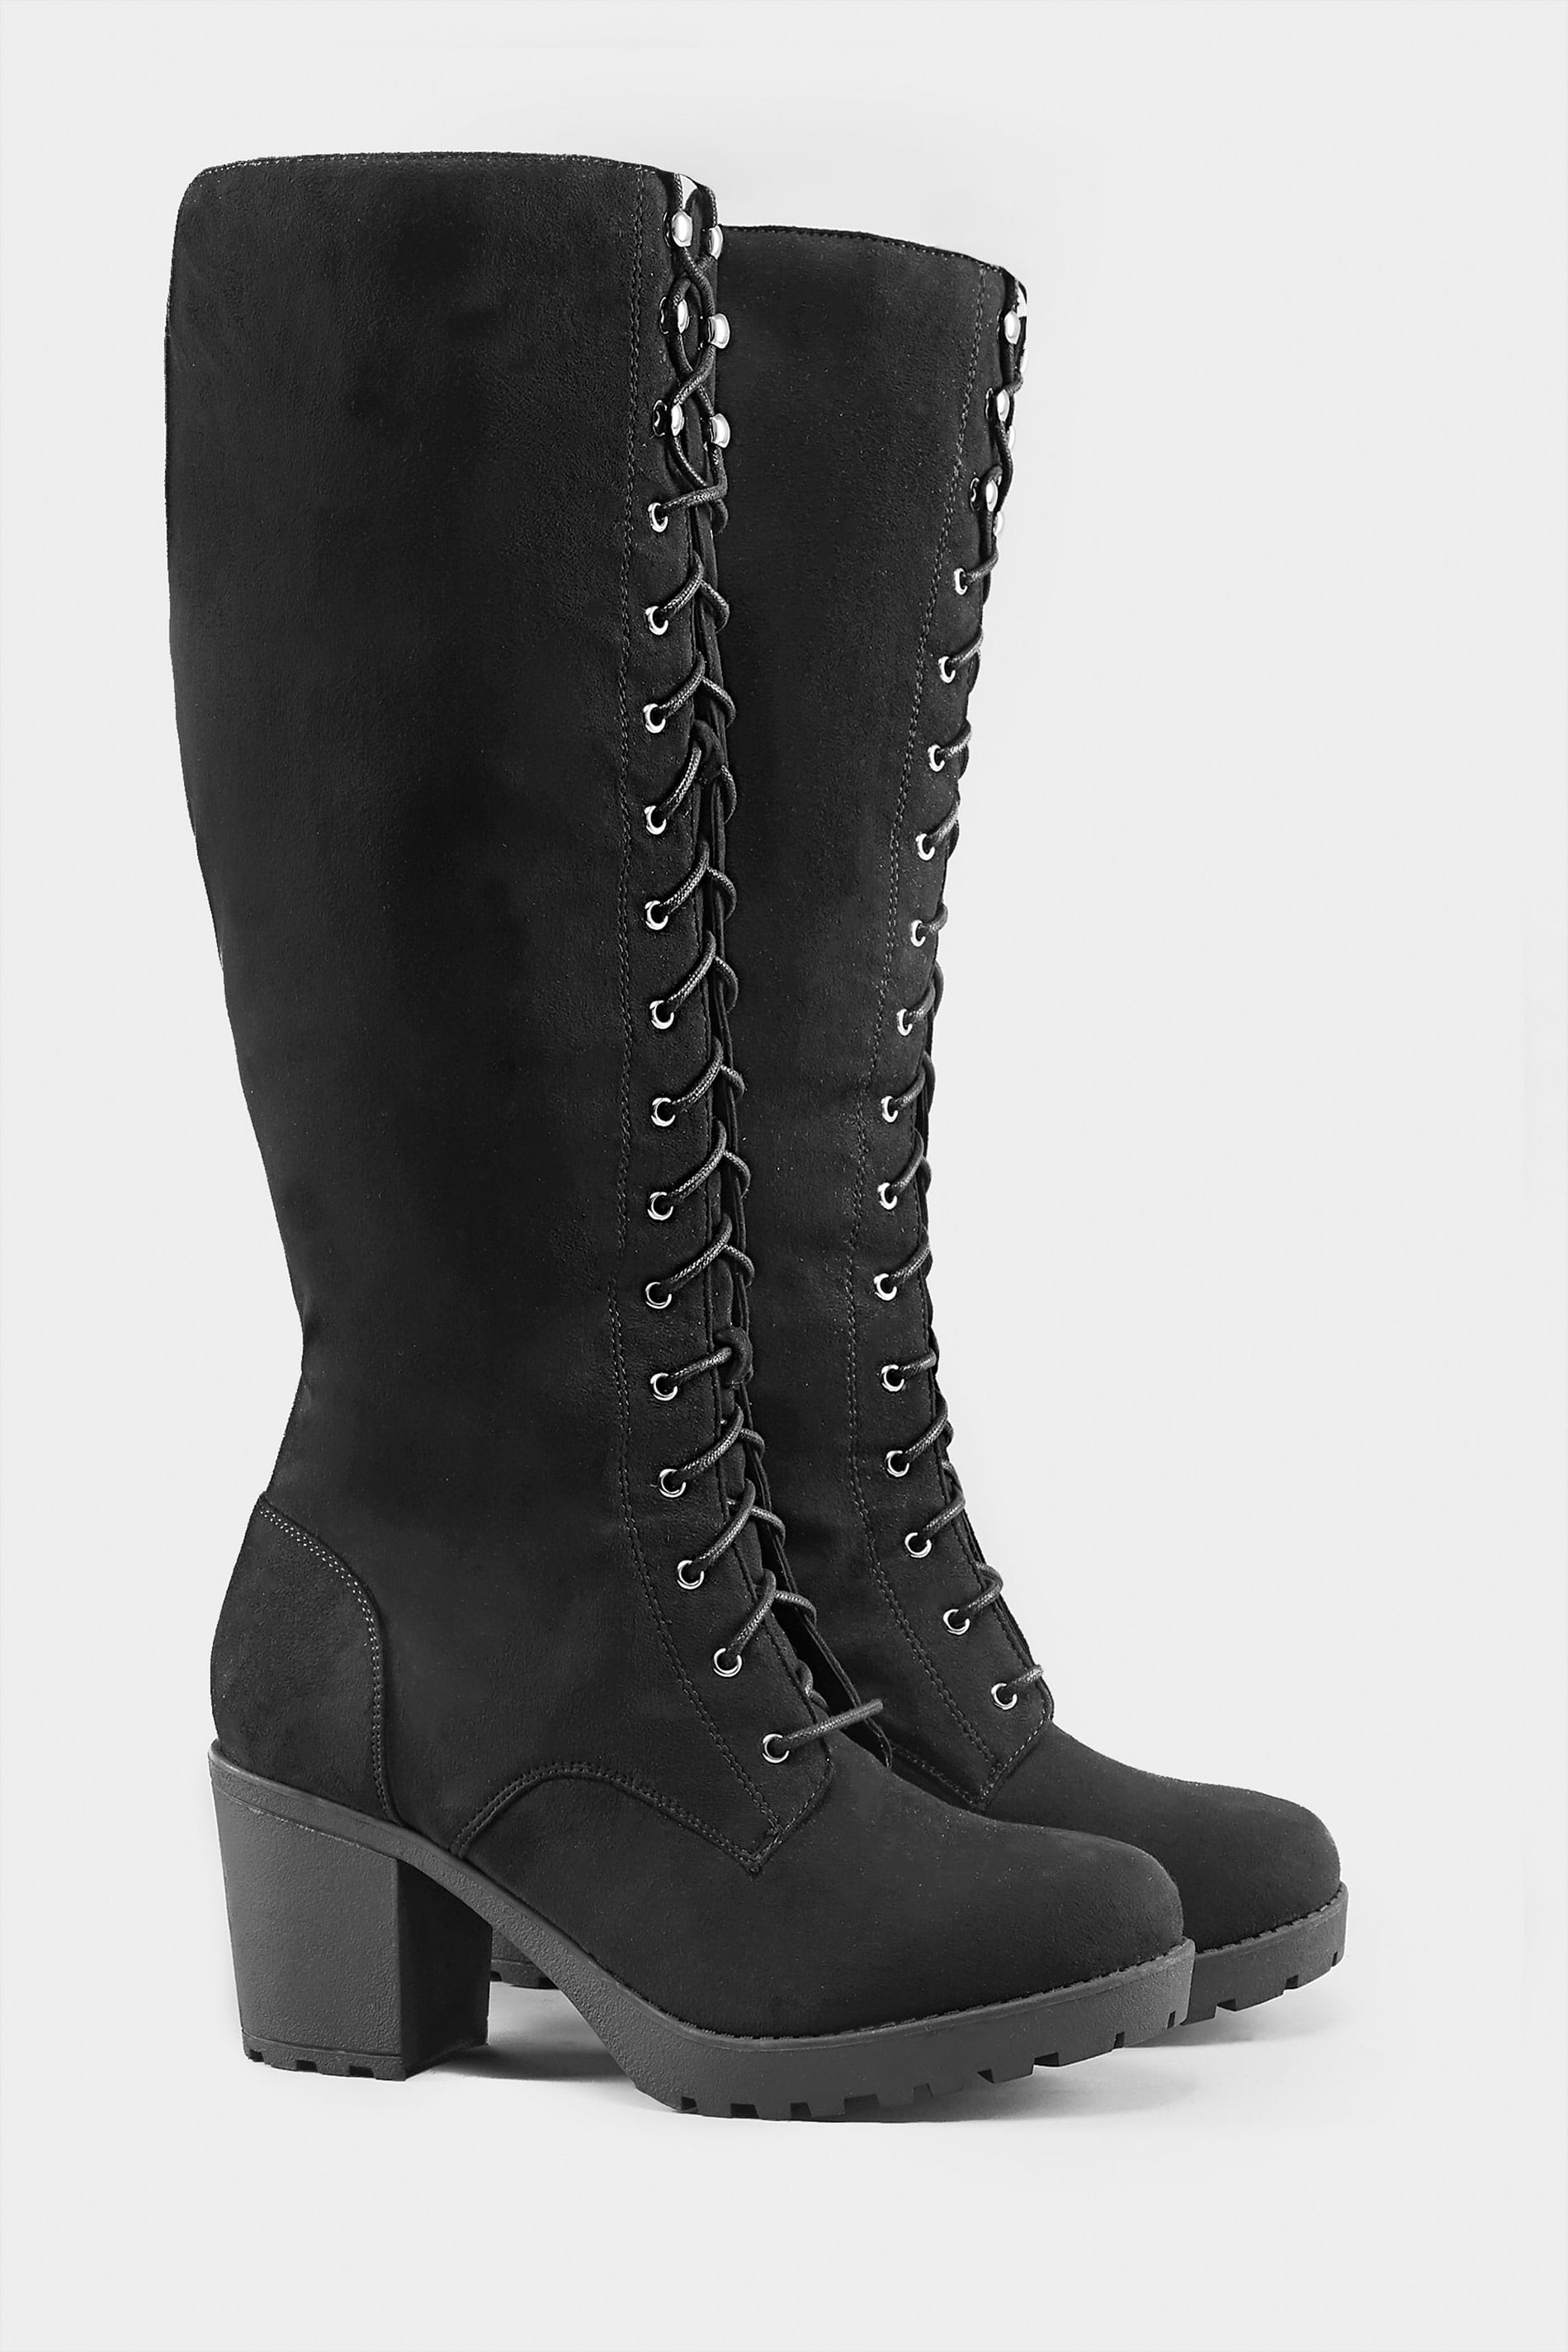 Black Lace Up Heeled Knee High Boots In Extra Wide Fit Yours Clothing